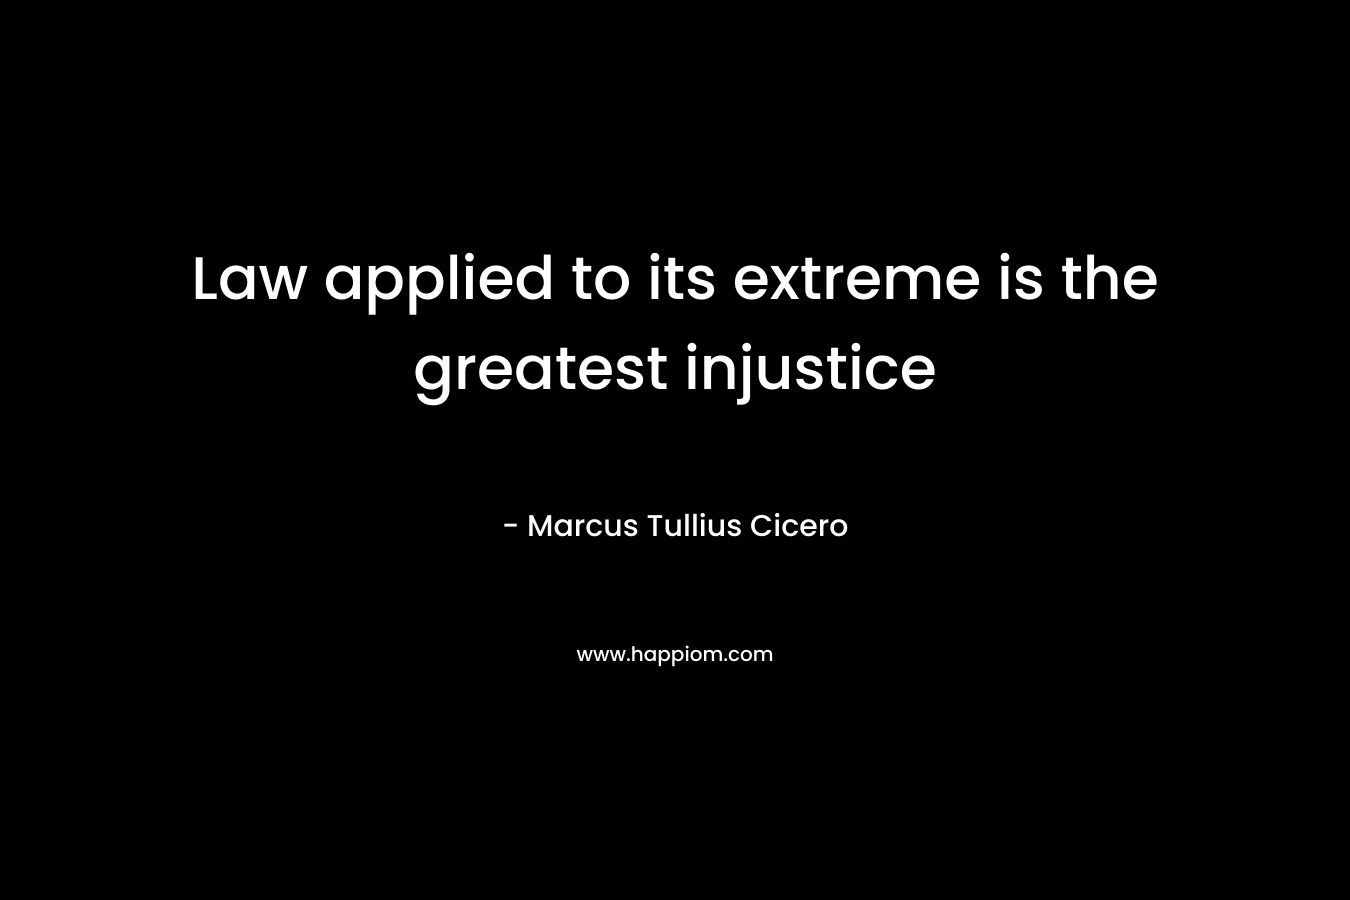 Law applied to its extreme is the greatest injustice